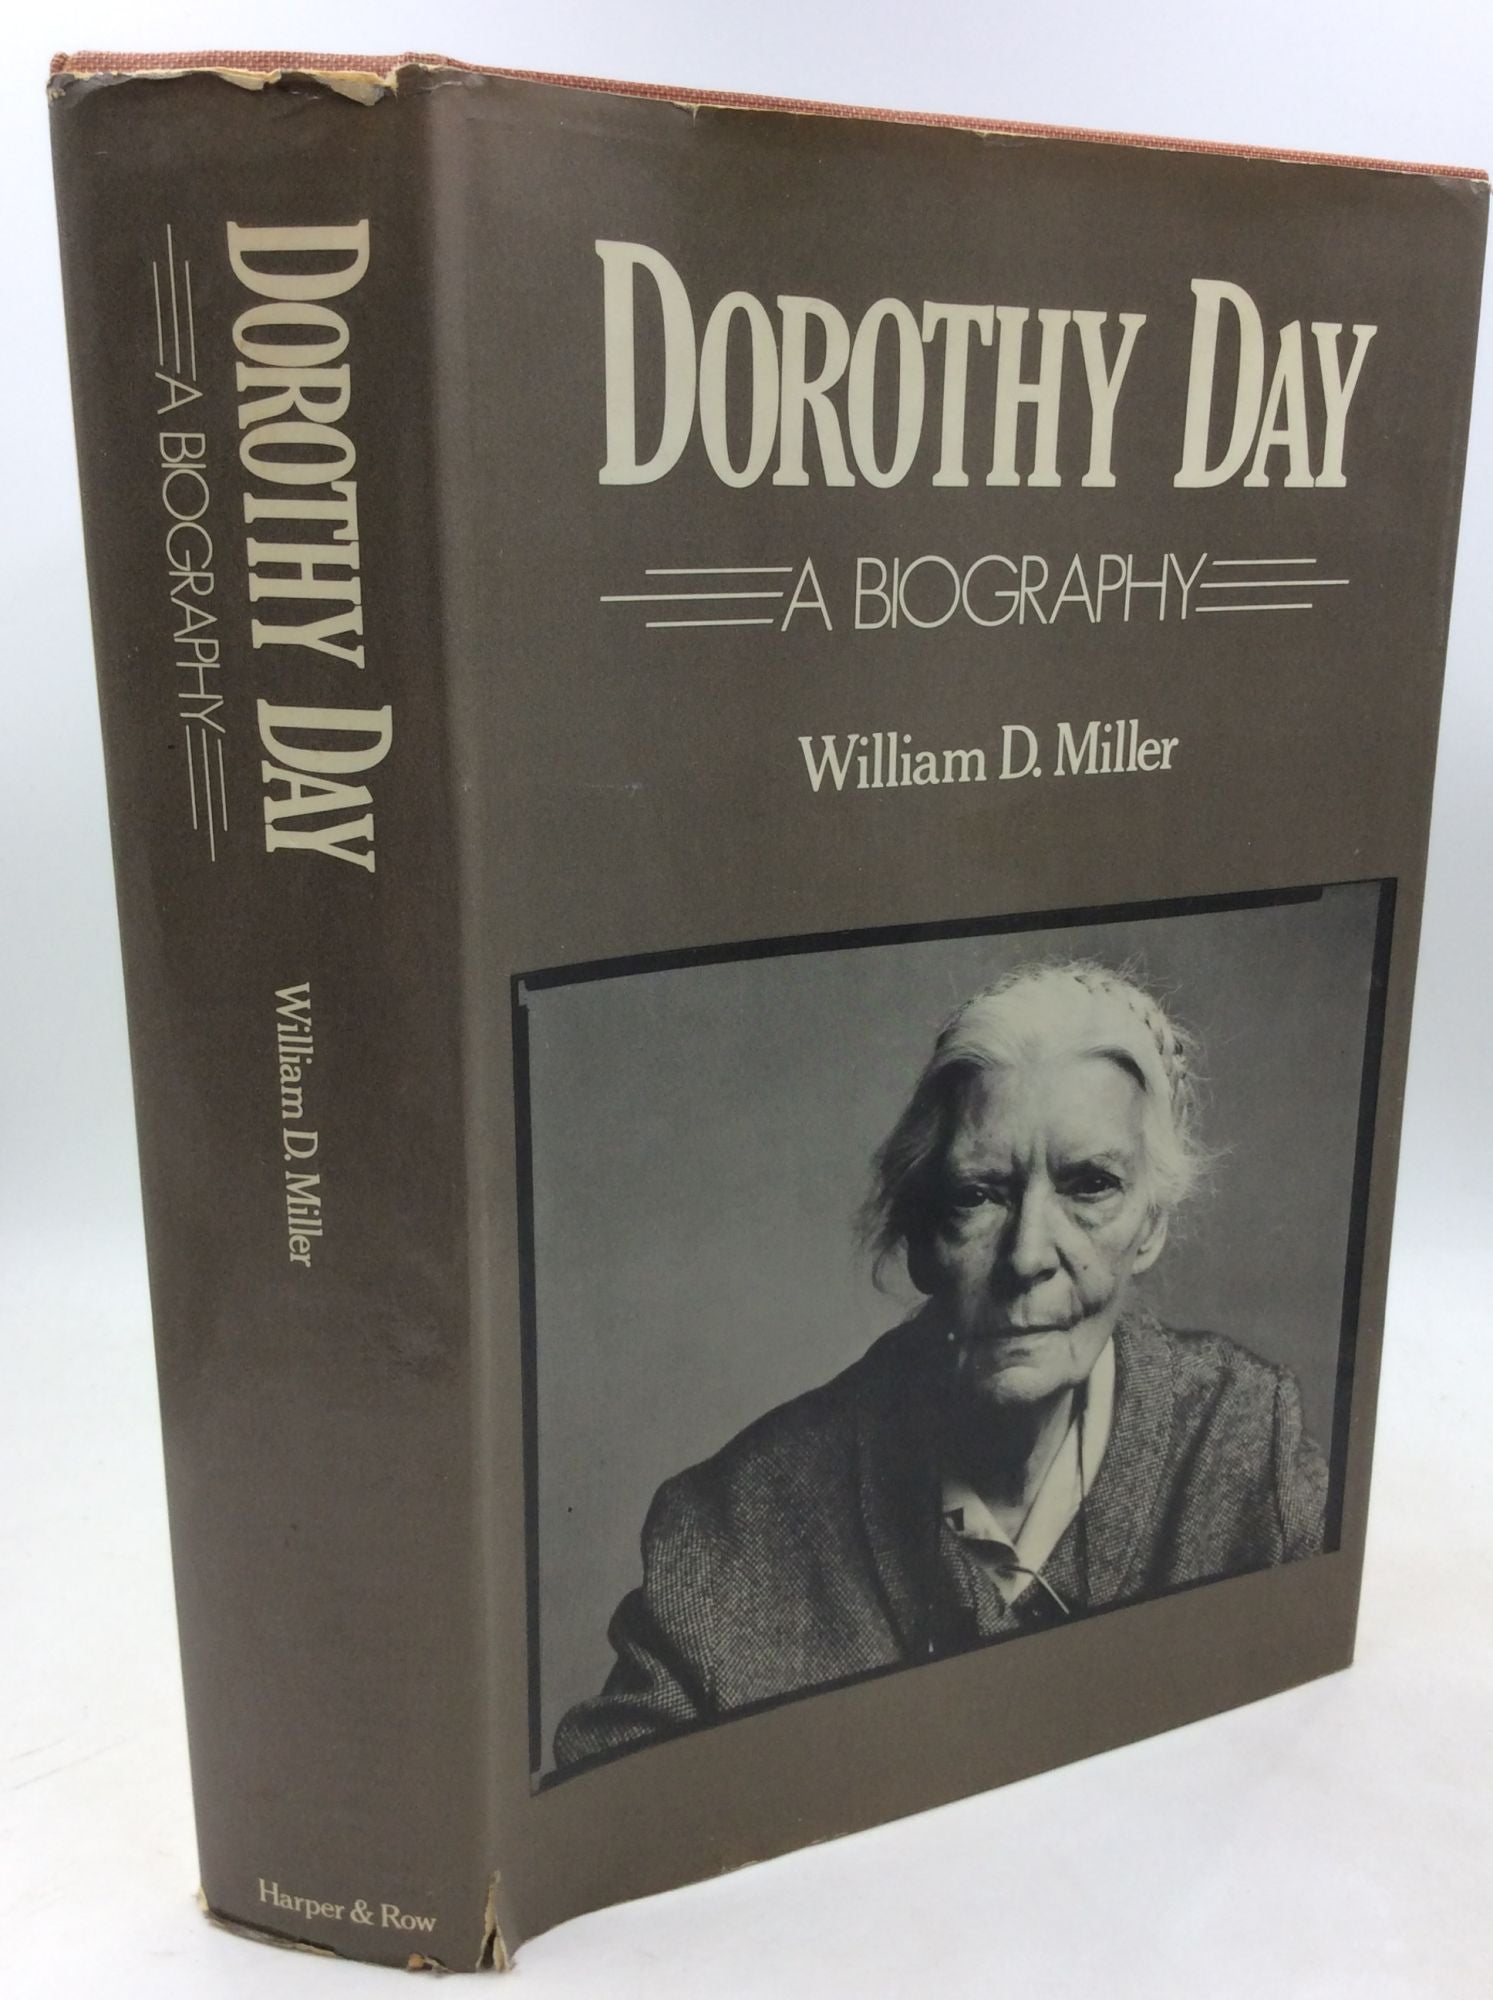 William D. Miller - Dorothy Day: A Biography